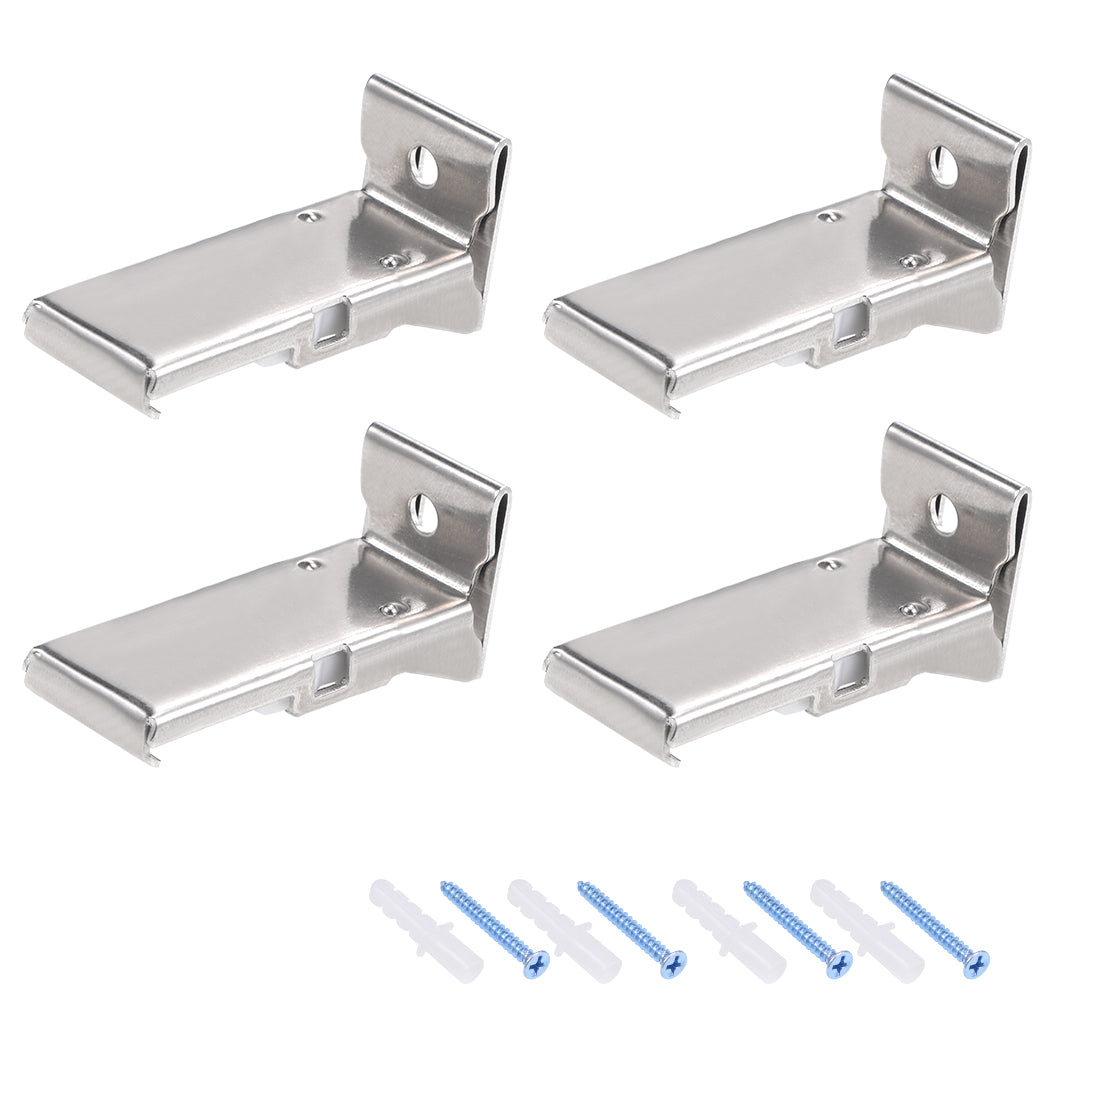 uxcell Uxcell Curtain Rod Bracket Stainless Steel Drapery Track Holder for 20mm Rail Mounted on Wall 4 Pcs